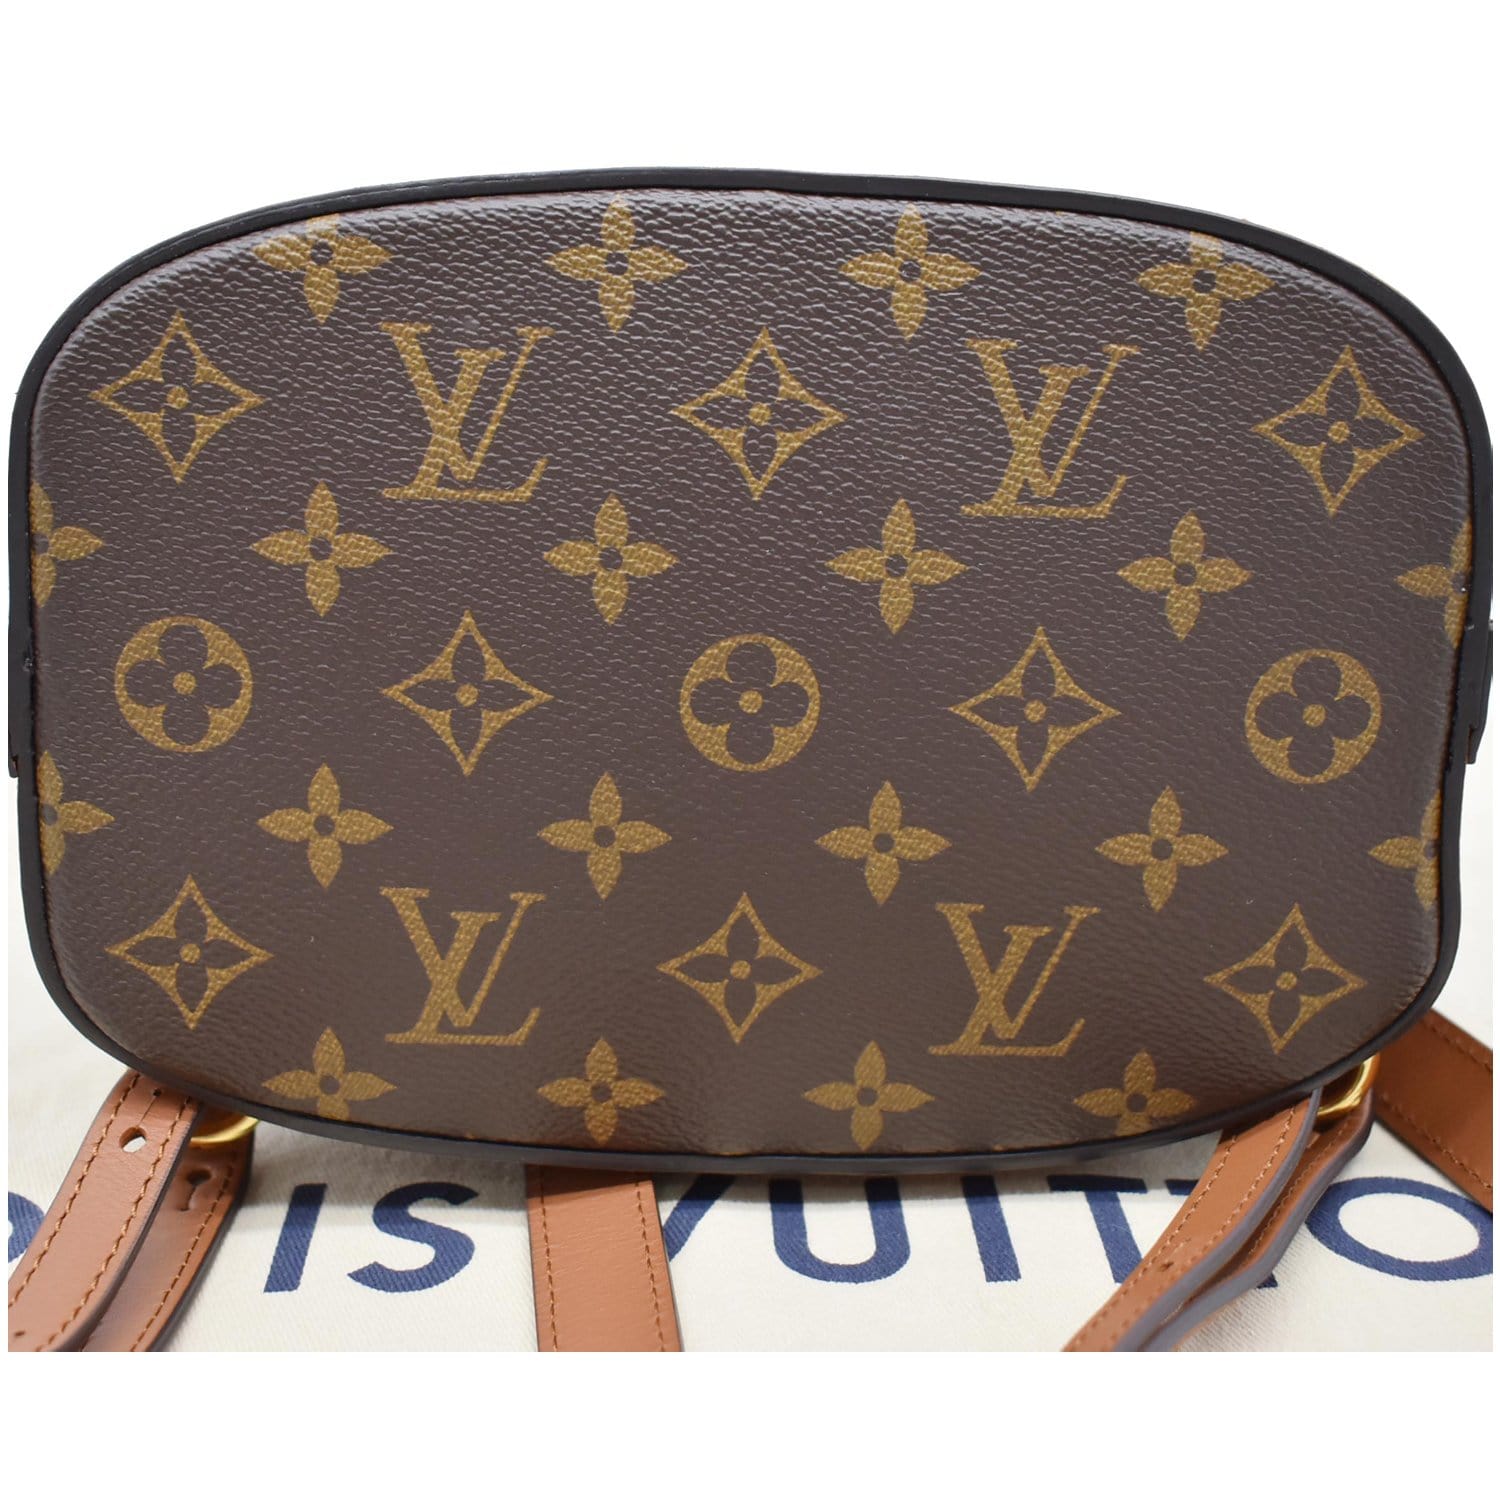 vuitton dauphine backpack